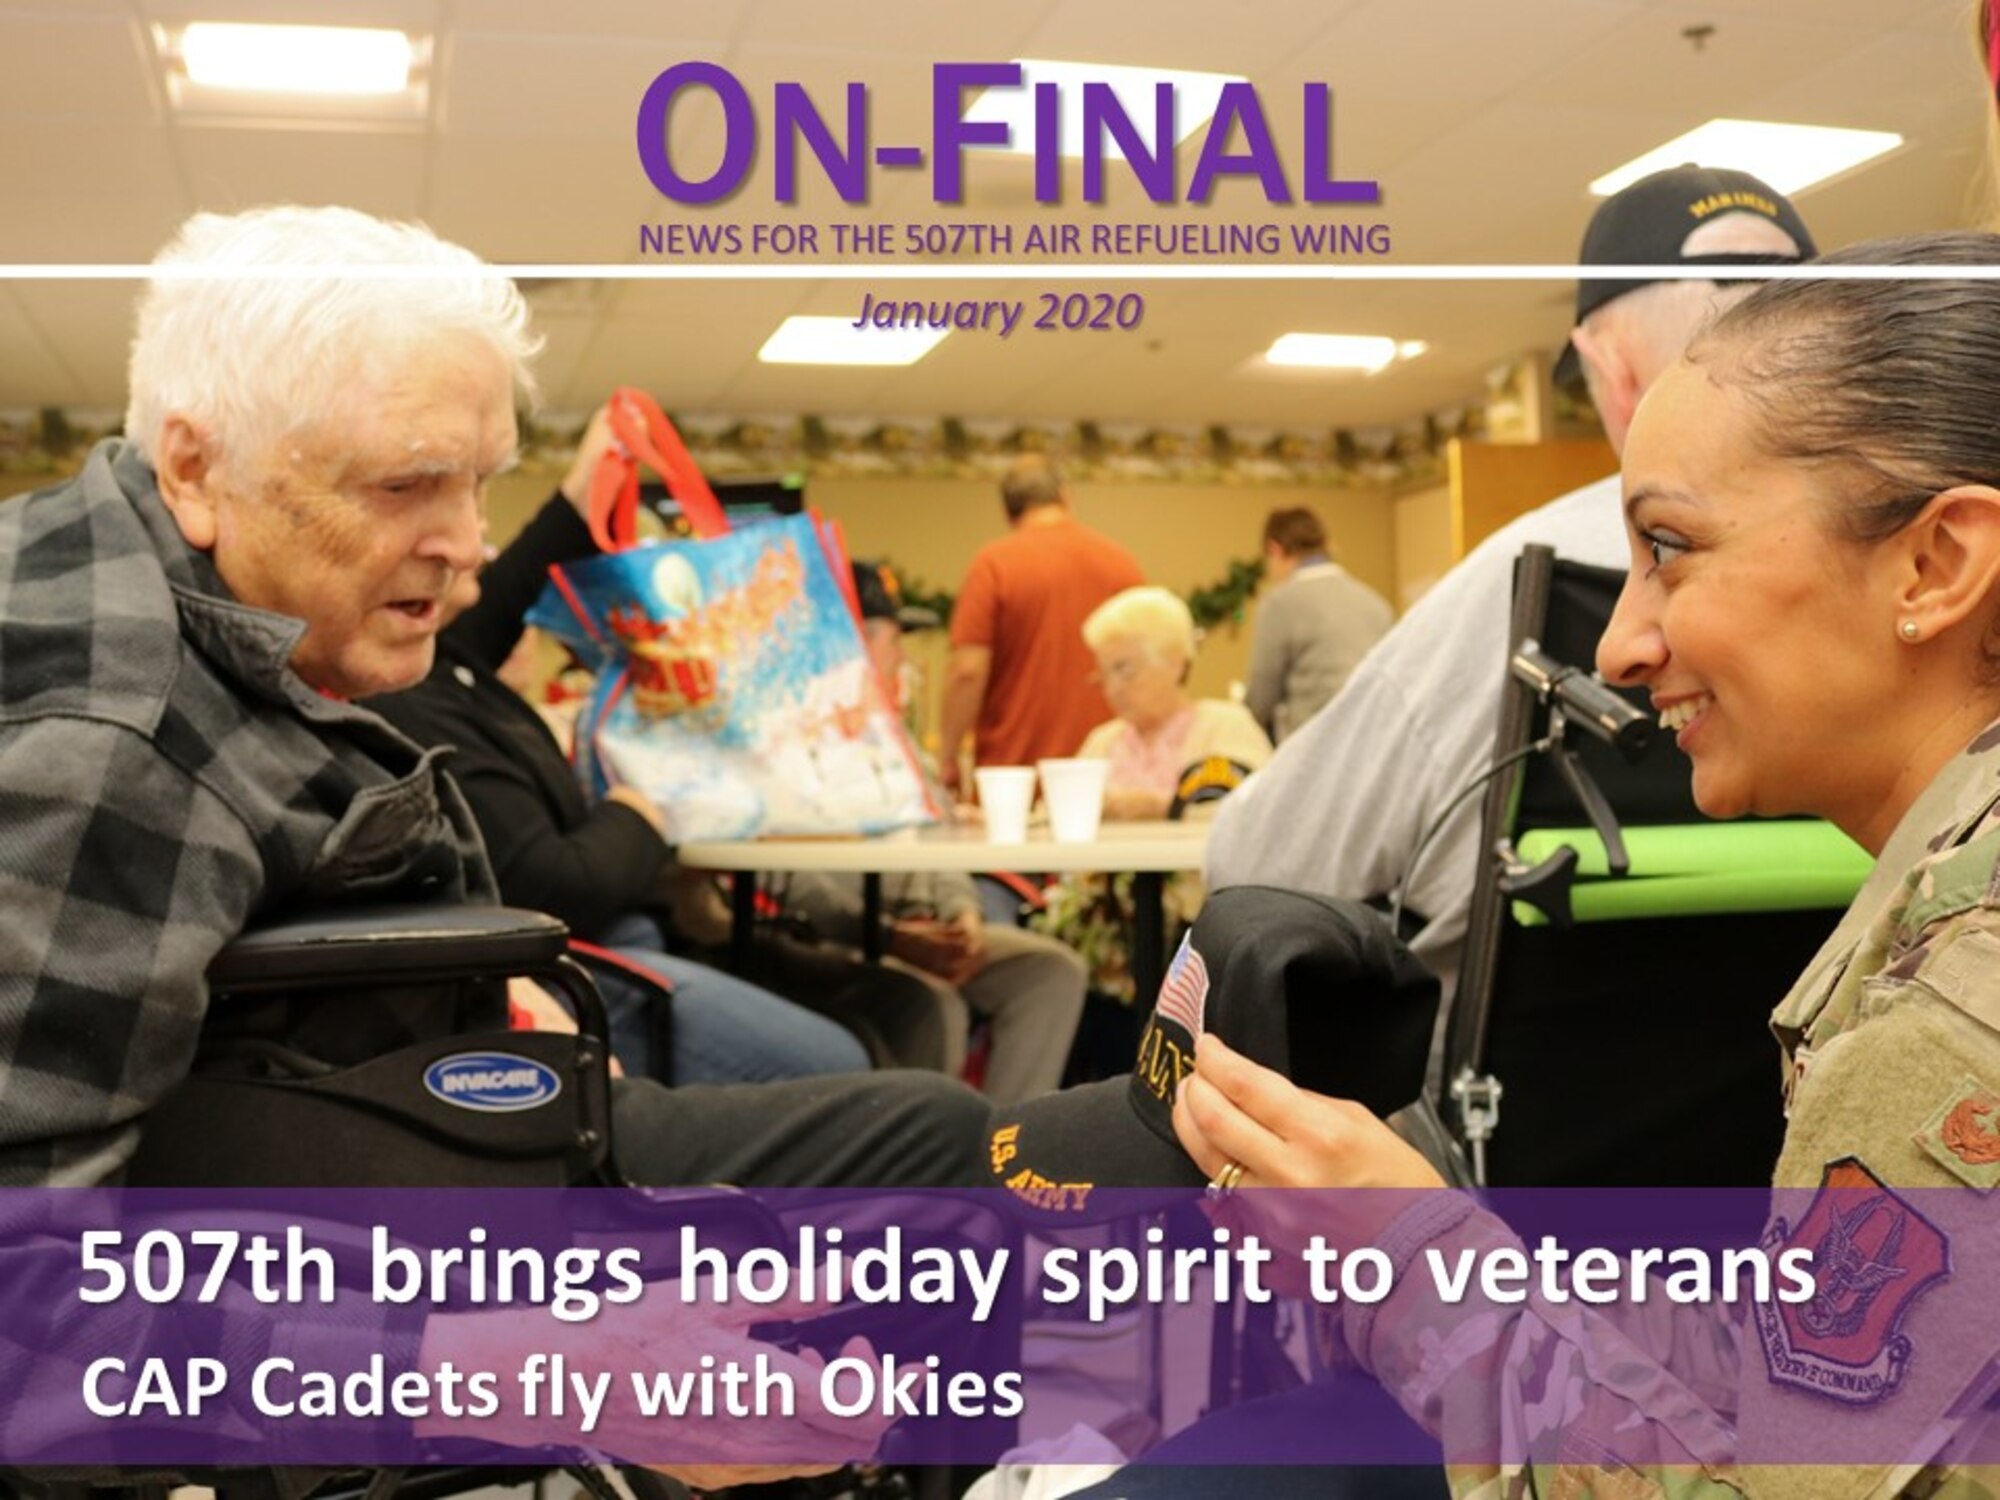 Members of the 507th Air Refueling Wing visited with veterans at the Norman Veteran's Center in Norman, Oklahoma, Dec. 20, 2019. (U.S. Air Force graphic by Senior Airman Mary Begy)